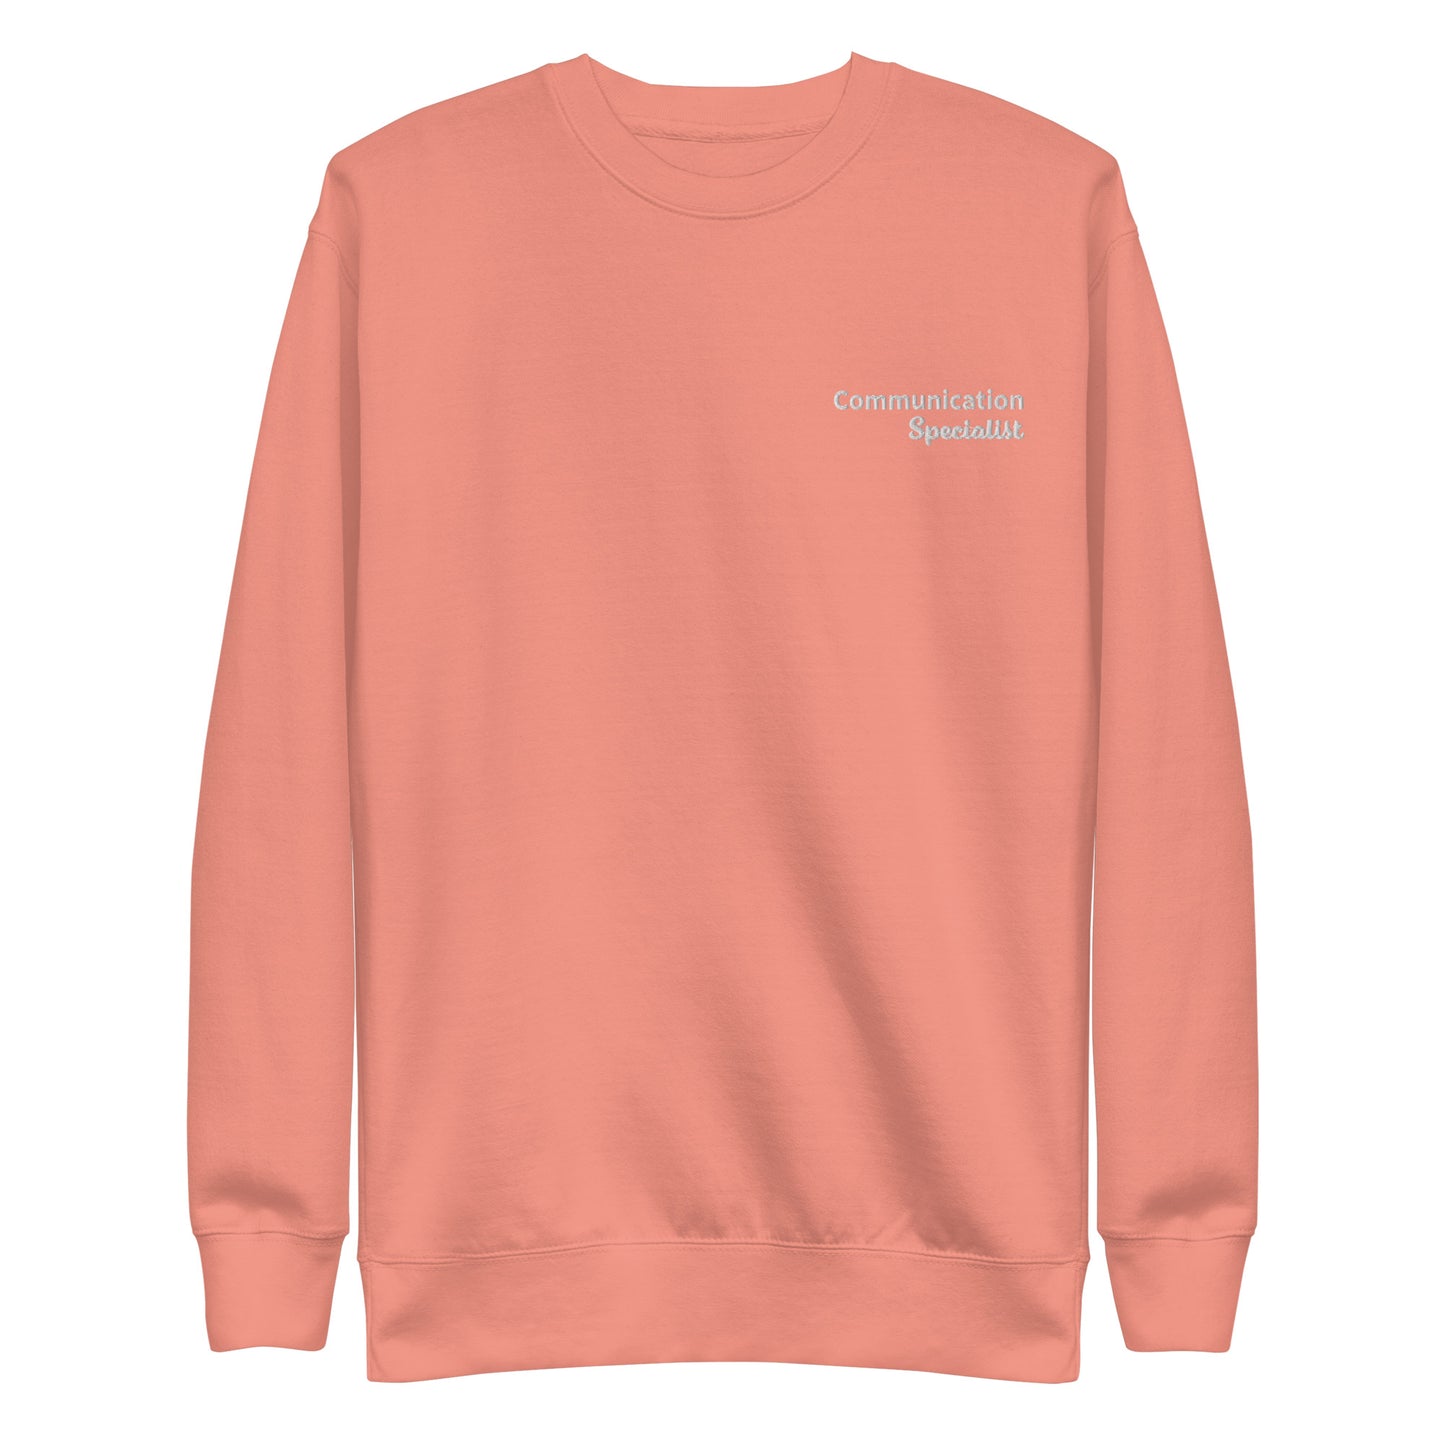 "Communication Specialist" Embroidered Sweater